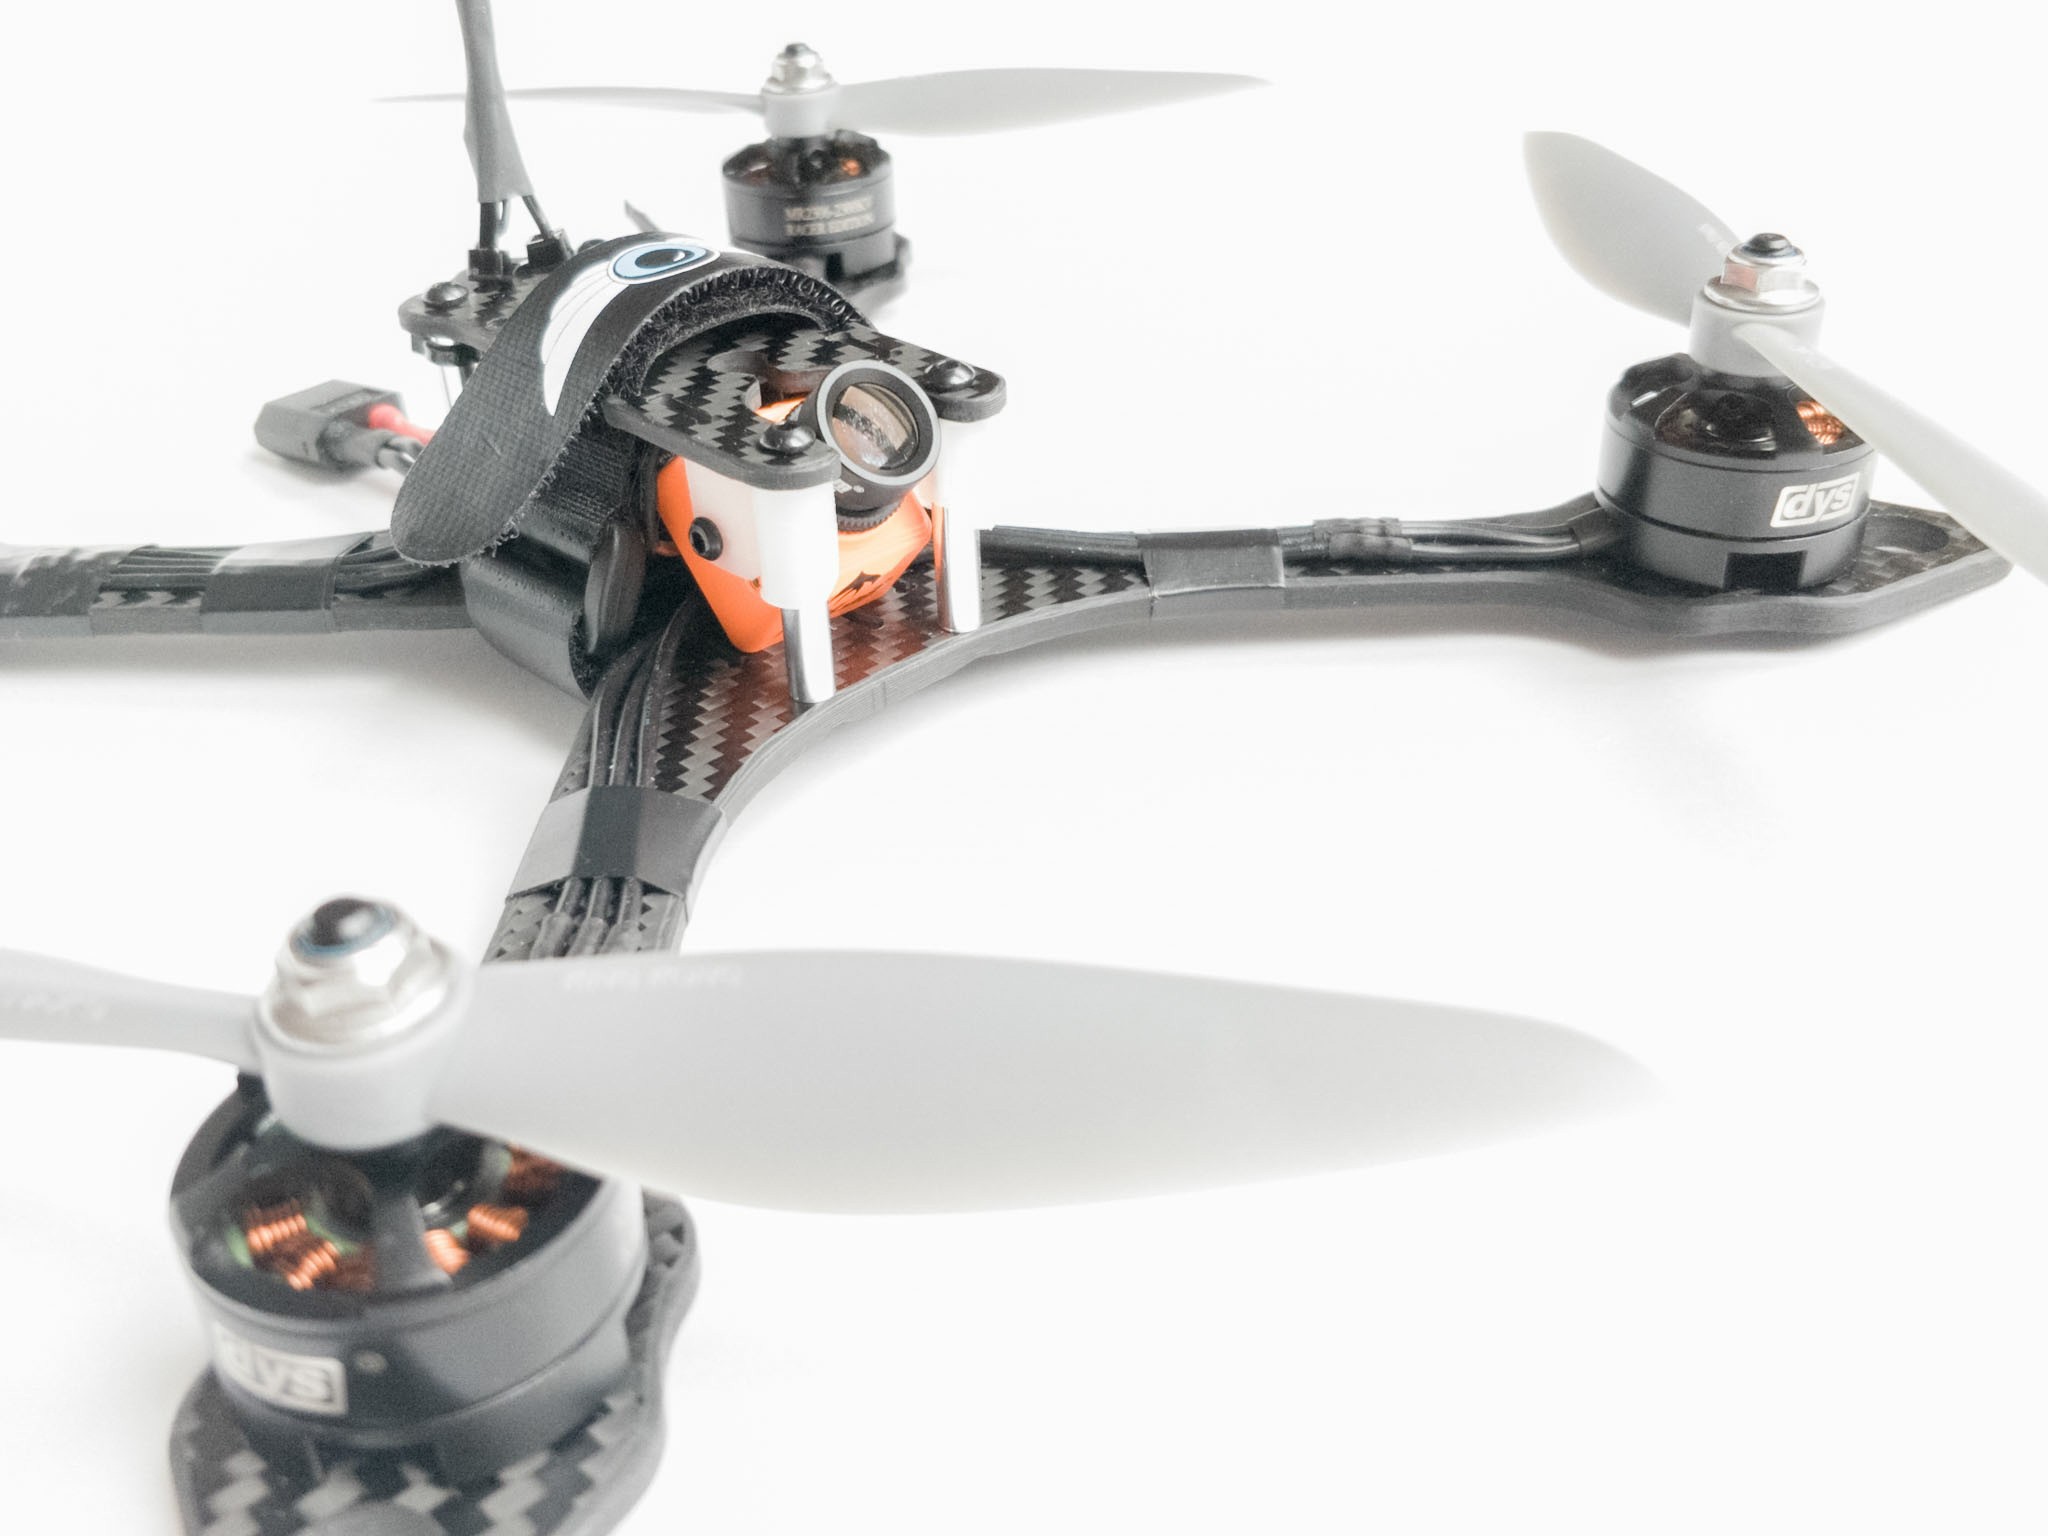 6-inch 4S lightweight Ready-To-Fly racing drone